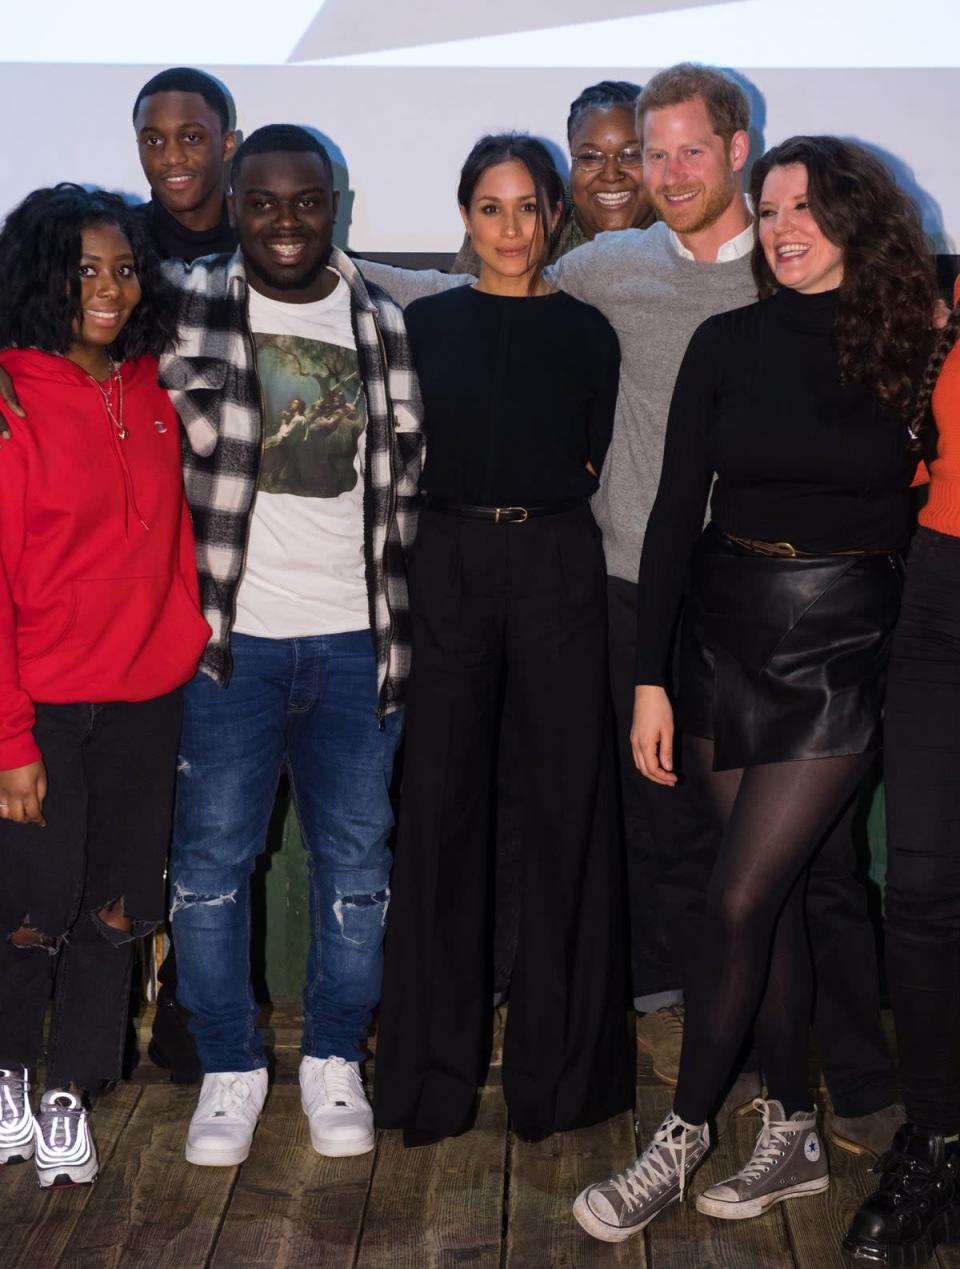 January 2018: Prince Harry and Meghan during a visit to Reprezent 107.3FM in Pop Brixton. The Reprezent training programme was established in Peckham in 2008, in response to the alarming rise in knife crime, to help young people develop and socialise through radio (Getty)